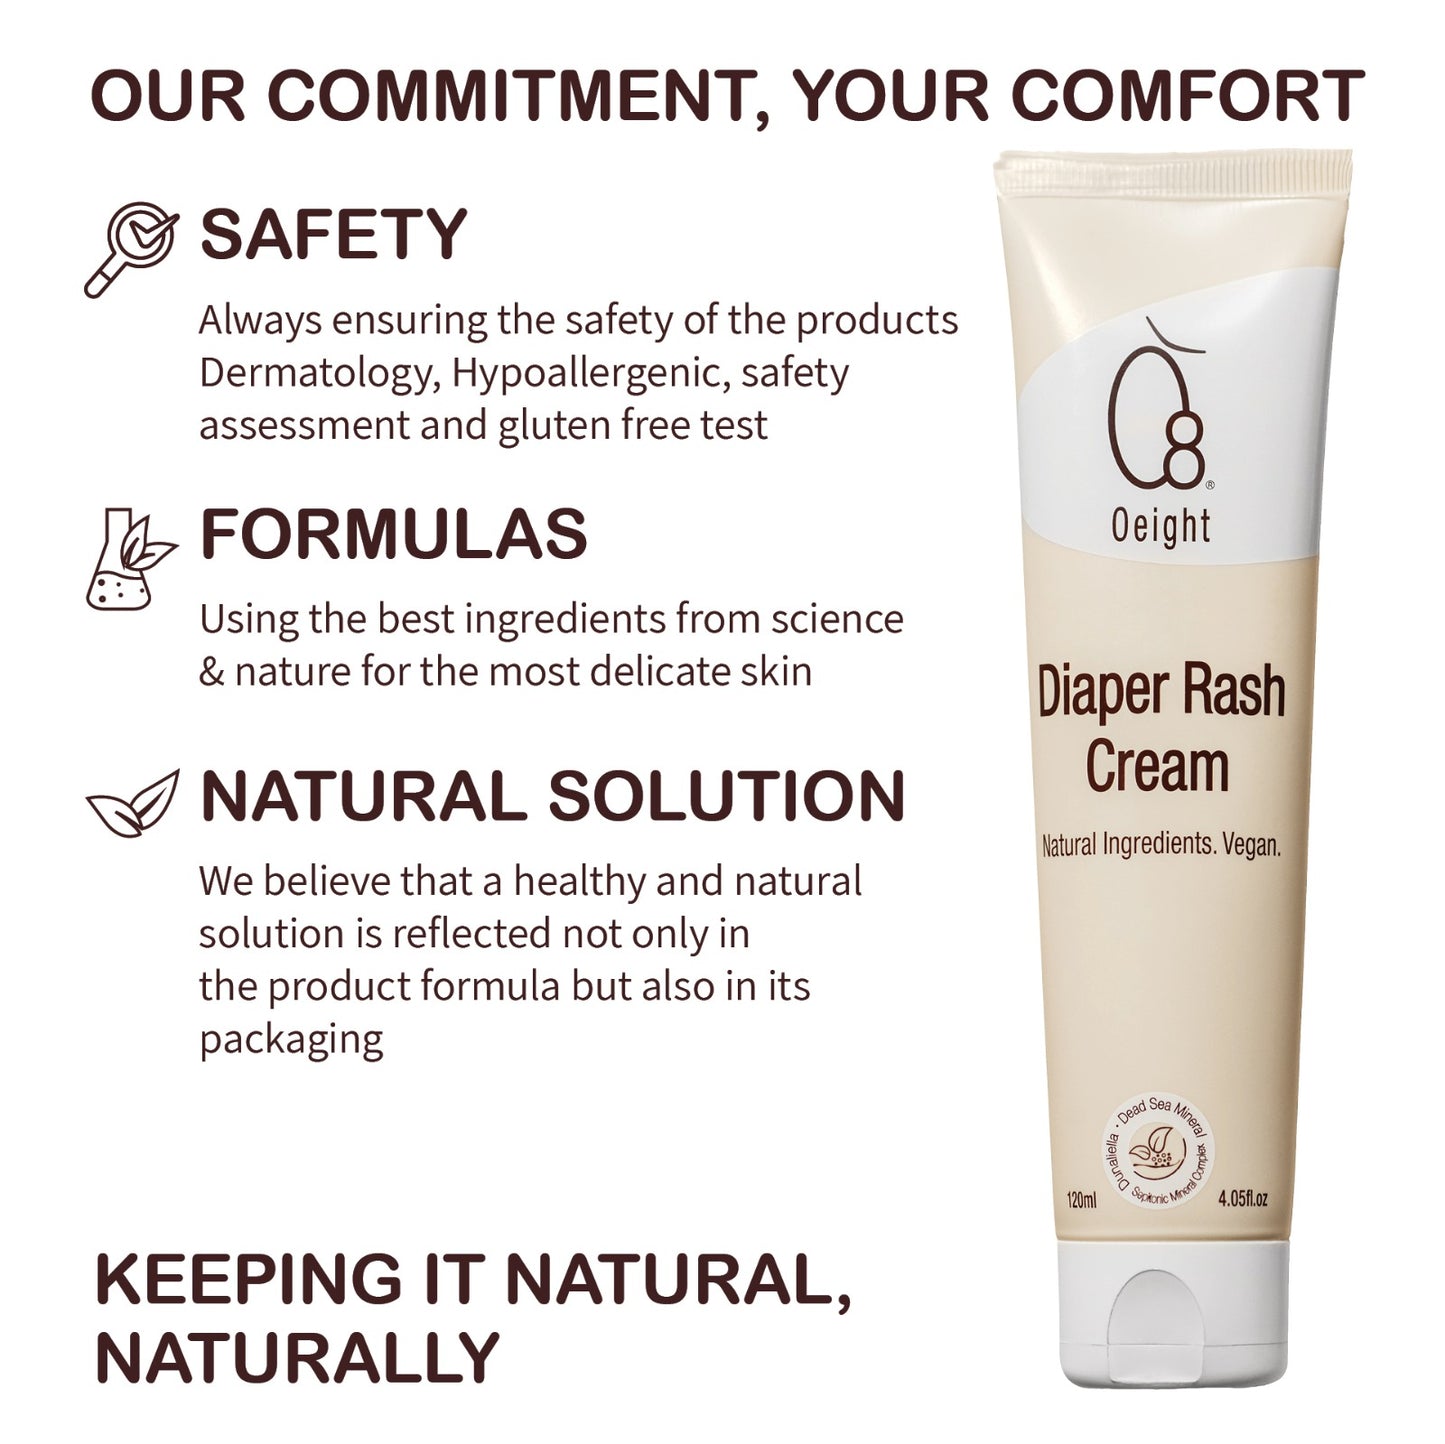 Oeight Diaper Rash Cream, 100% natural active ingredients enriched with zinc, calendula, olive oil, castor seed oil and pro-vitamin B5. Helps prevent Diaper rash and skin irritation.